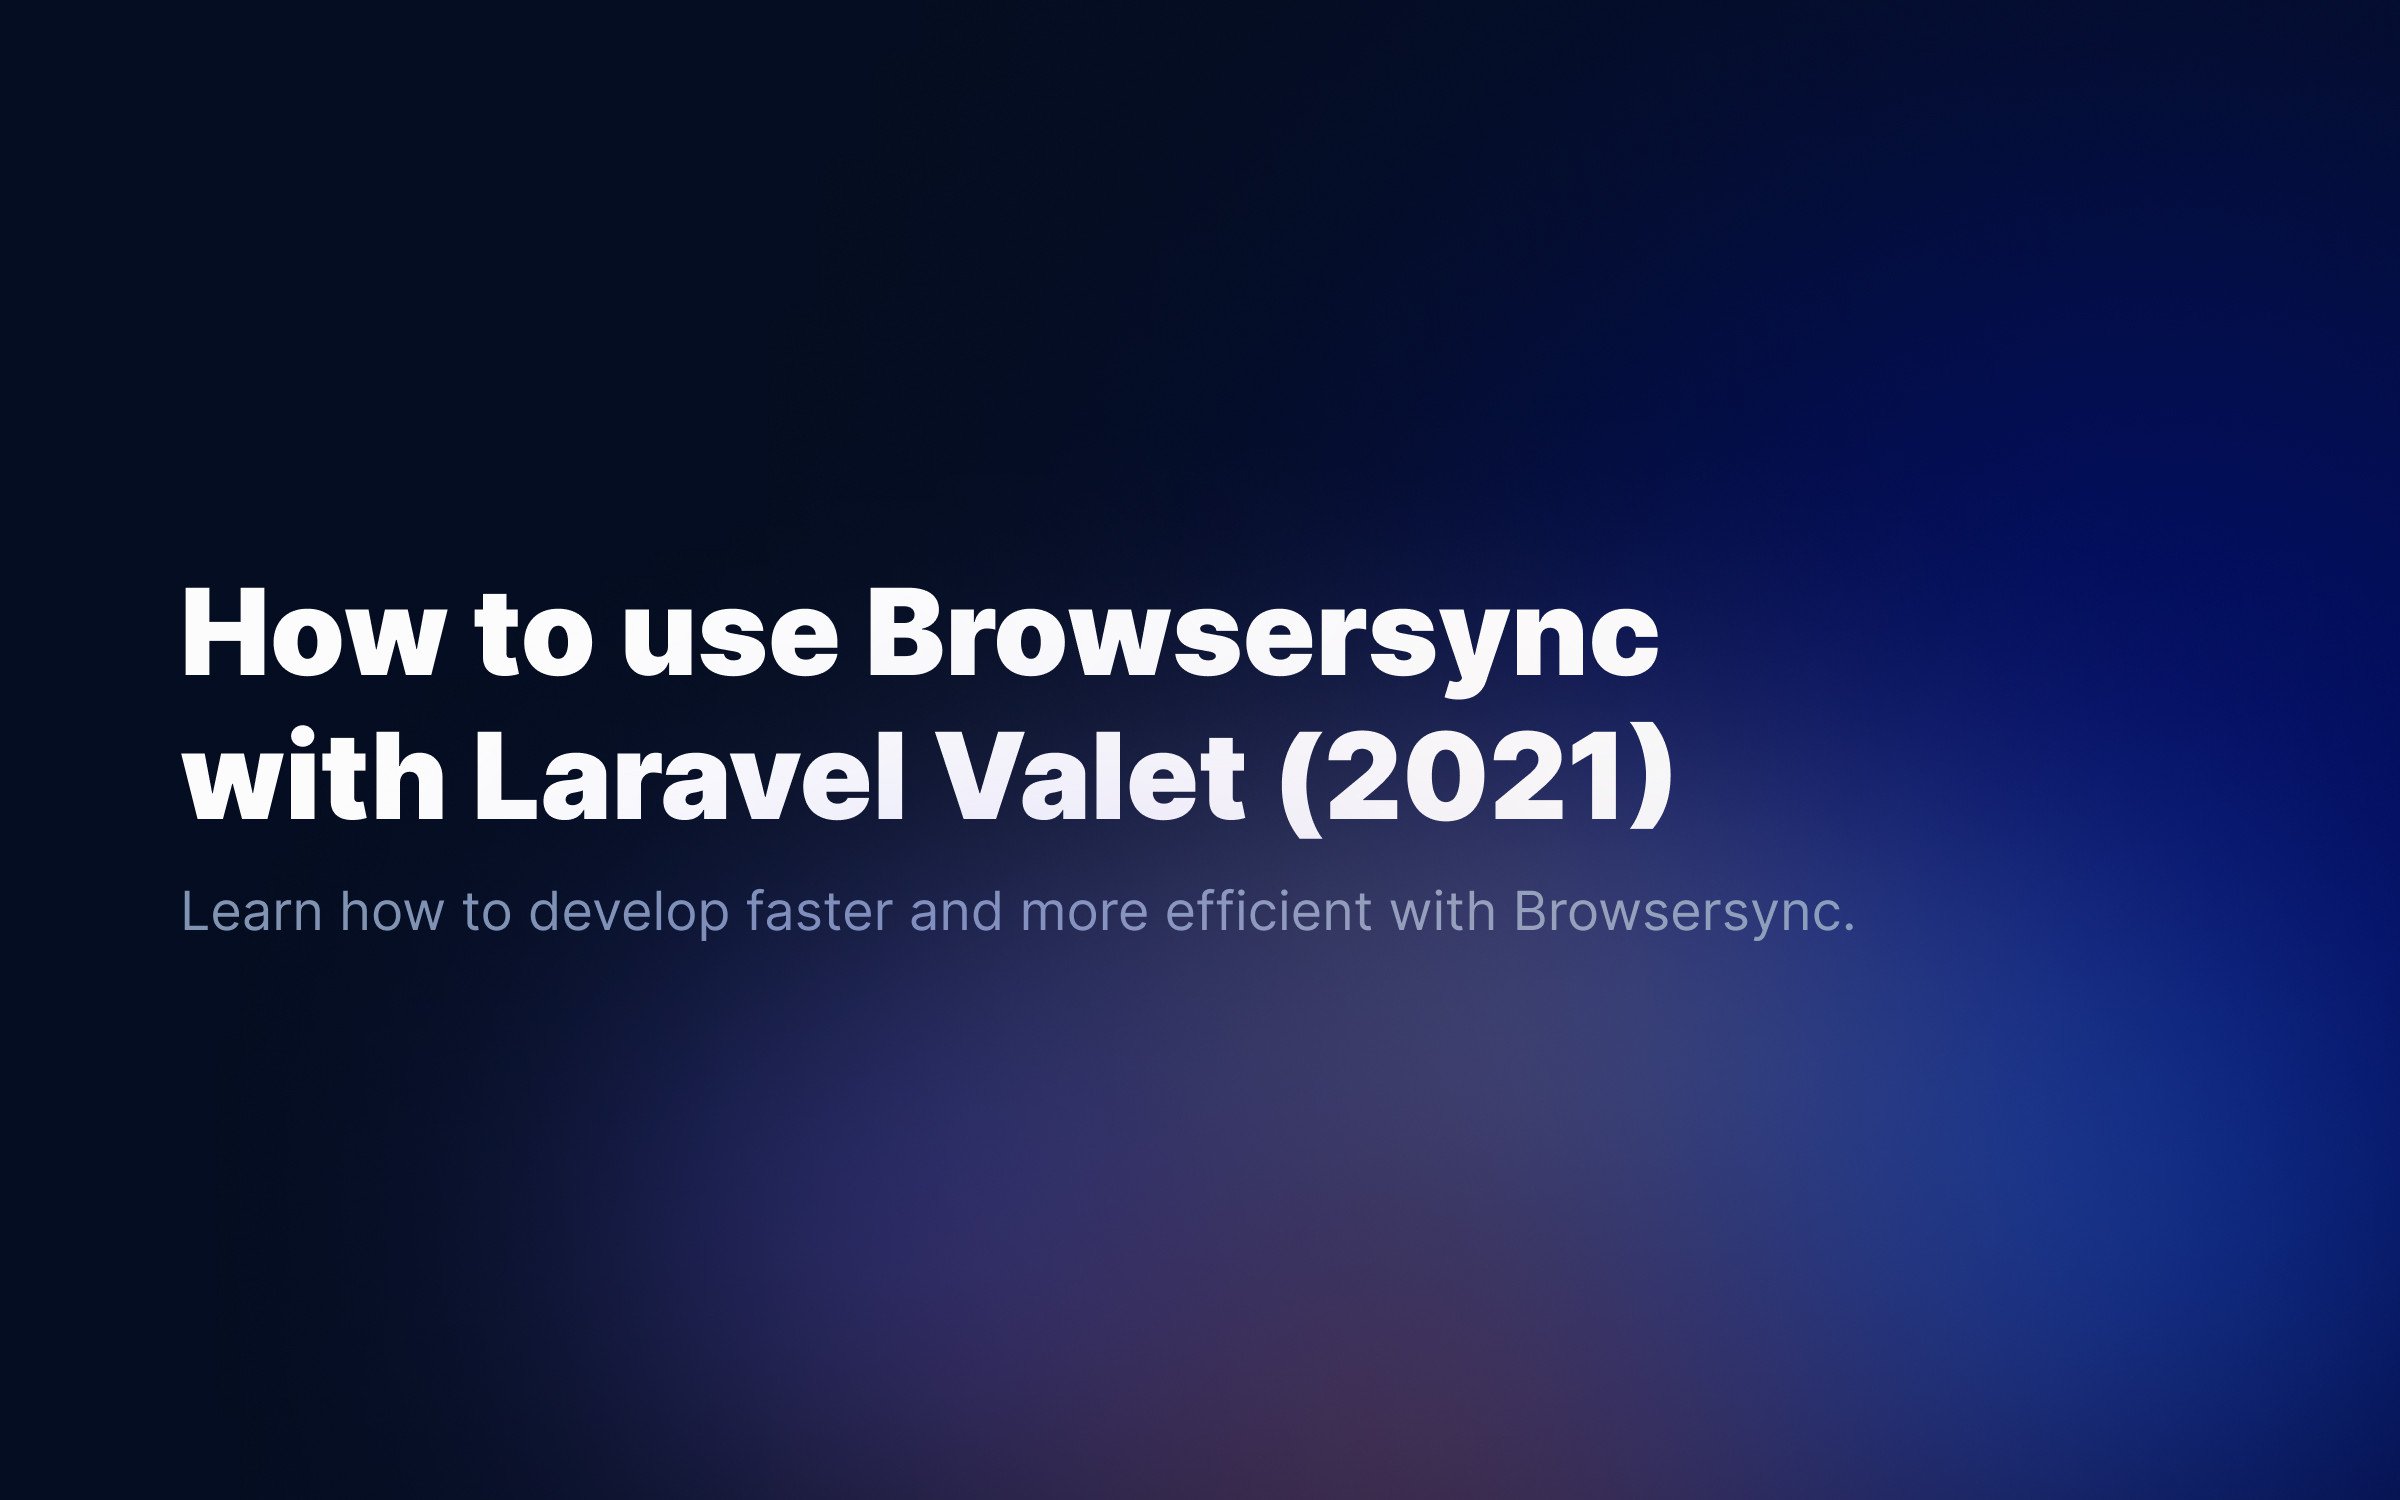 How to use Browsersync with Laravel Valet (2021)